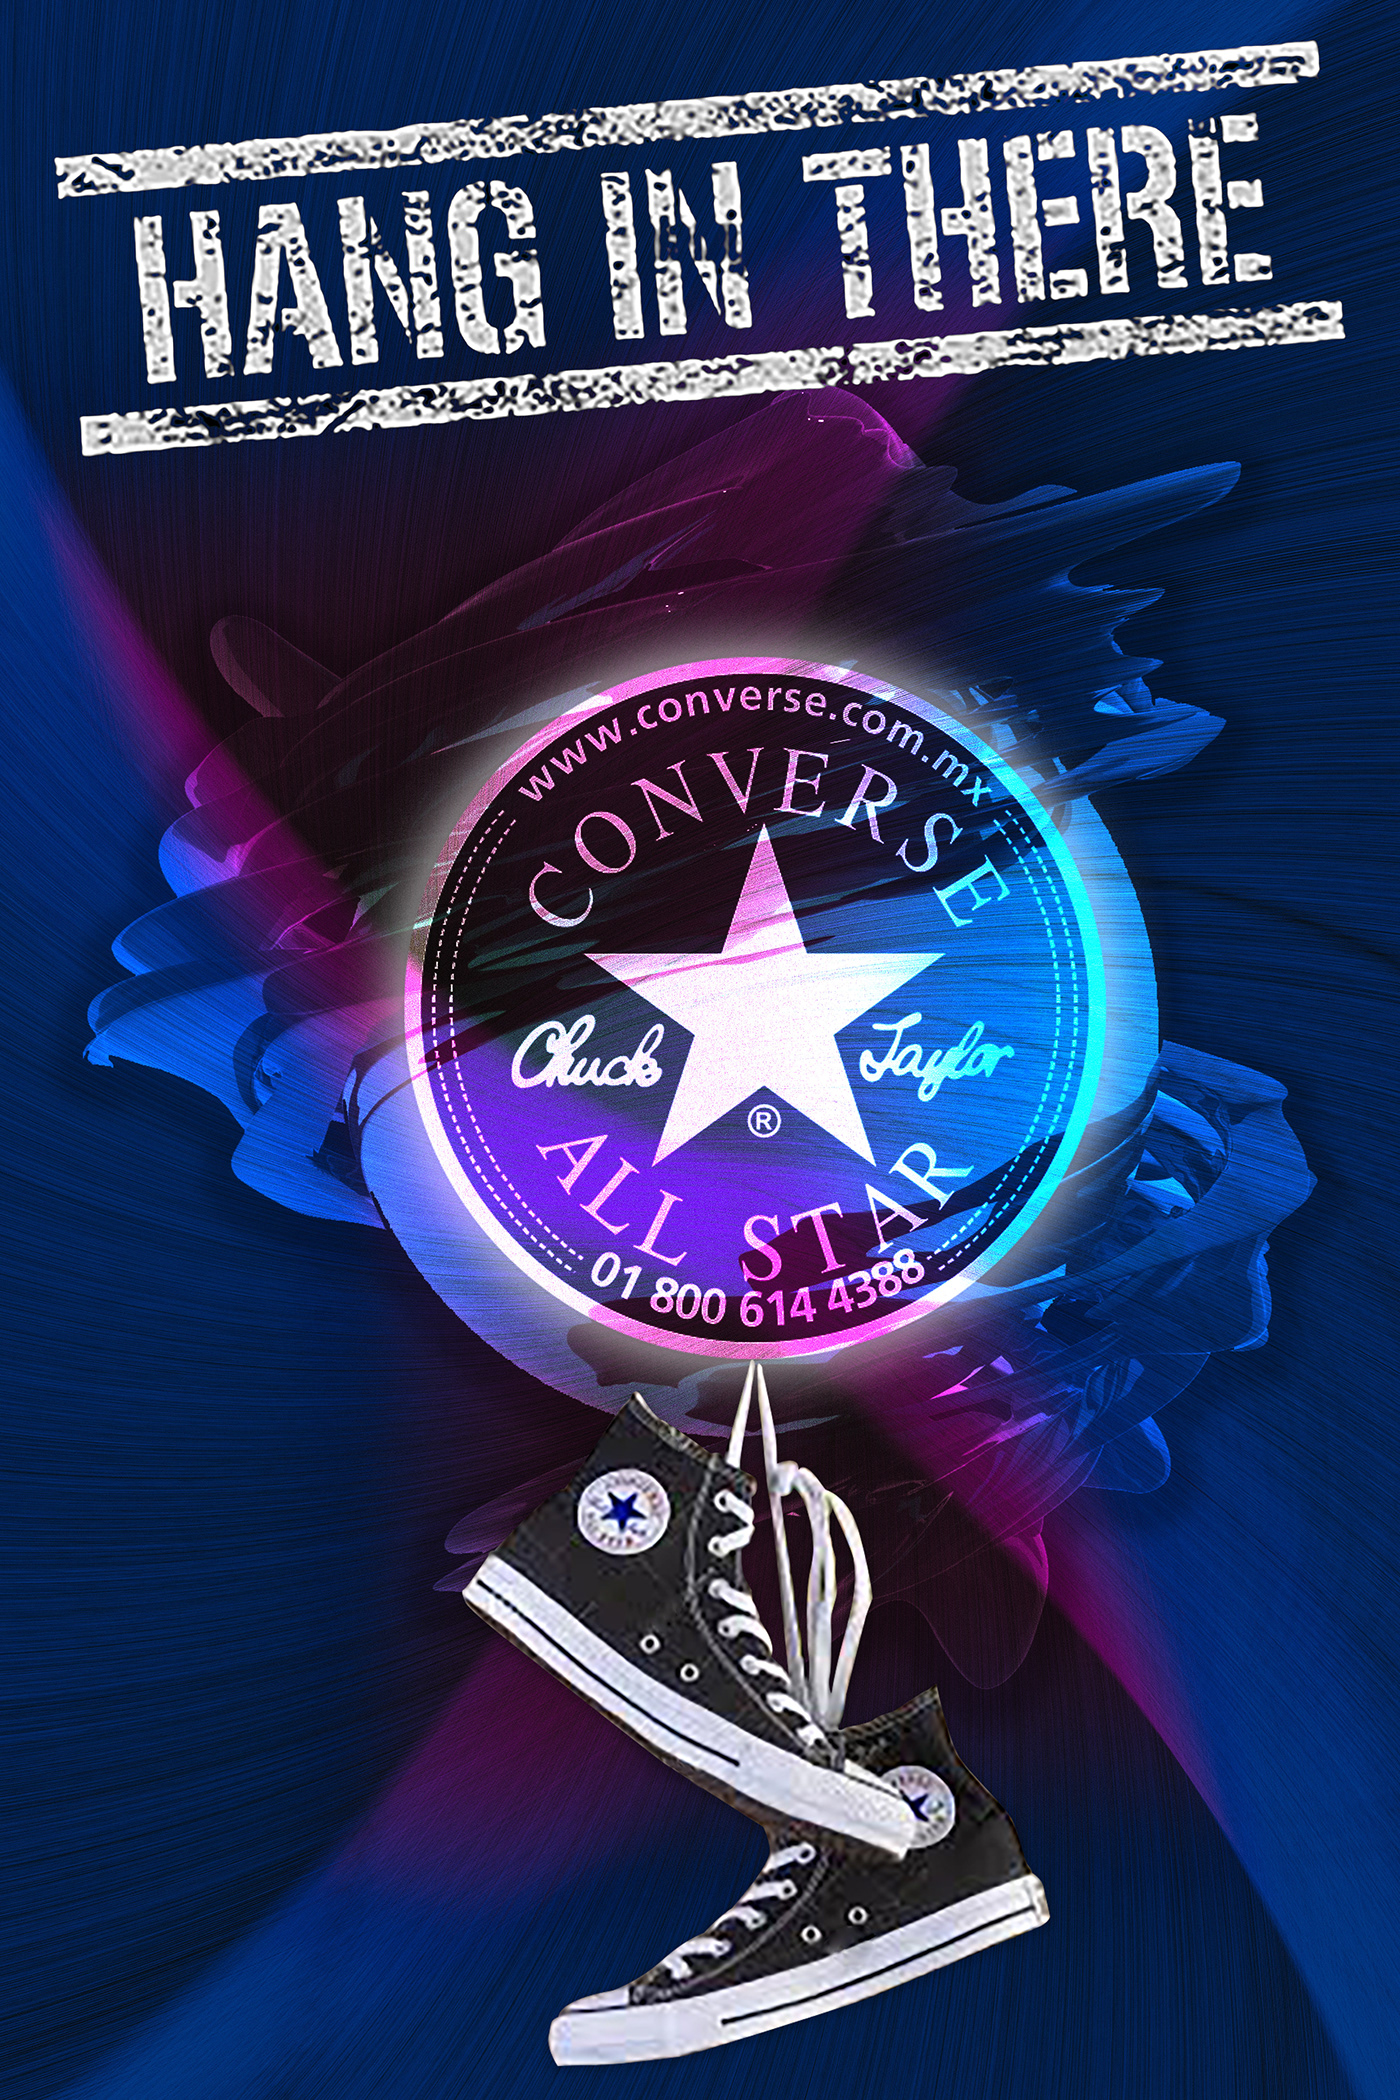 essay School Project advertizing all star converse Converse All Star shoes design